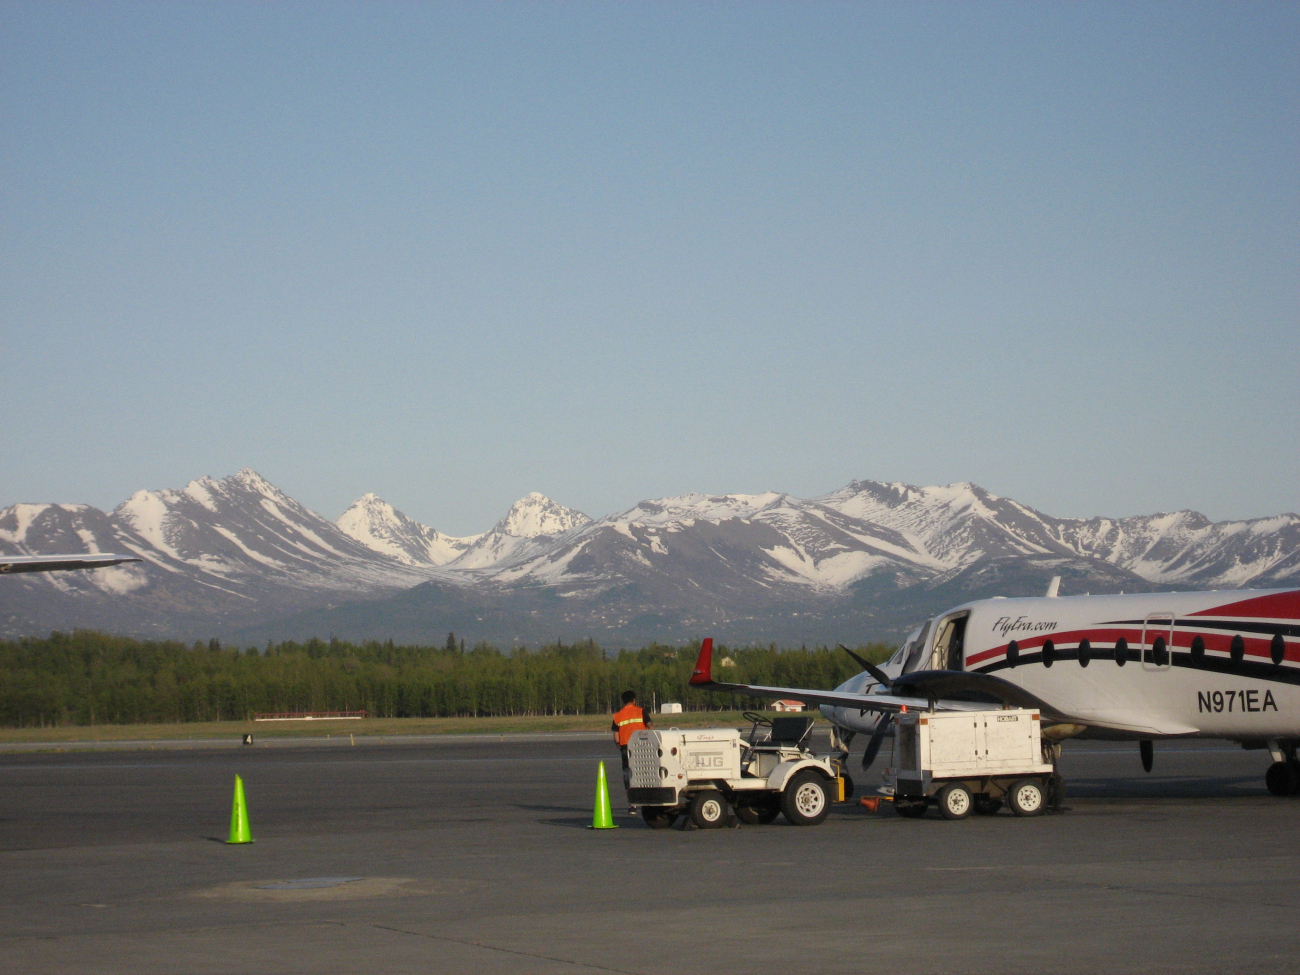 The Anchorage airport